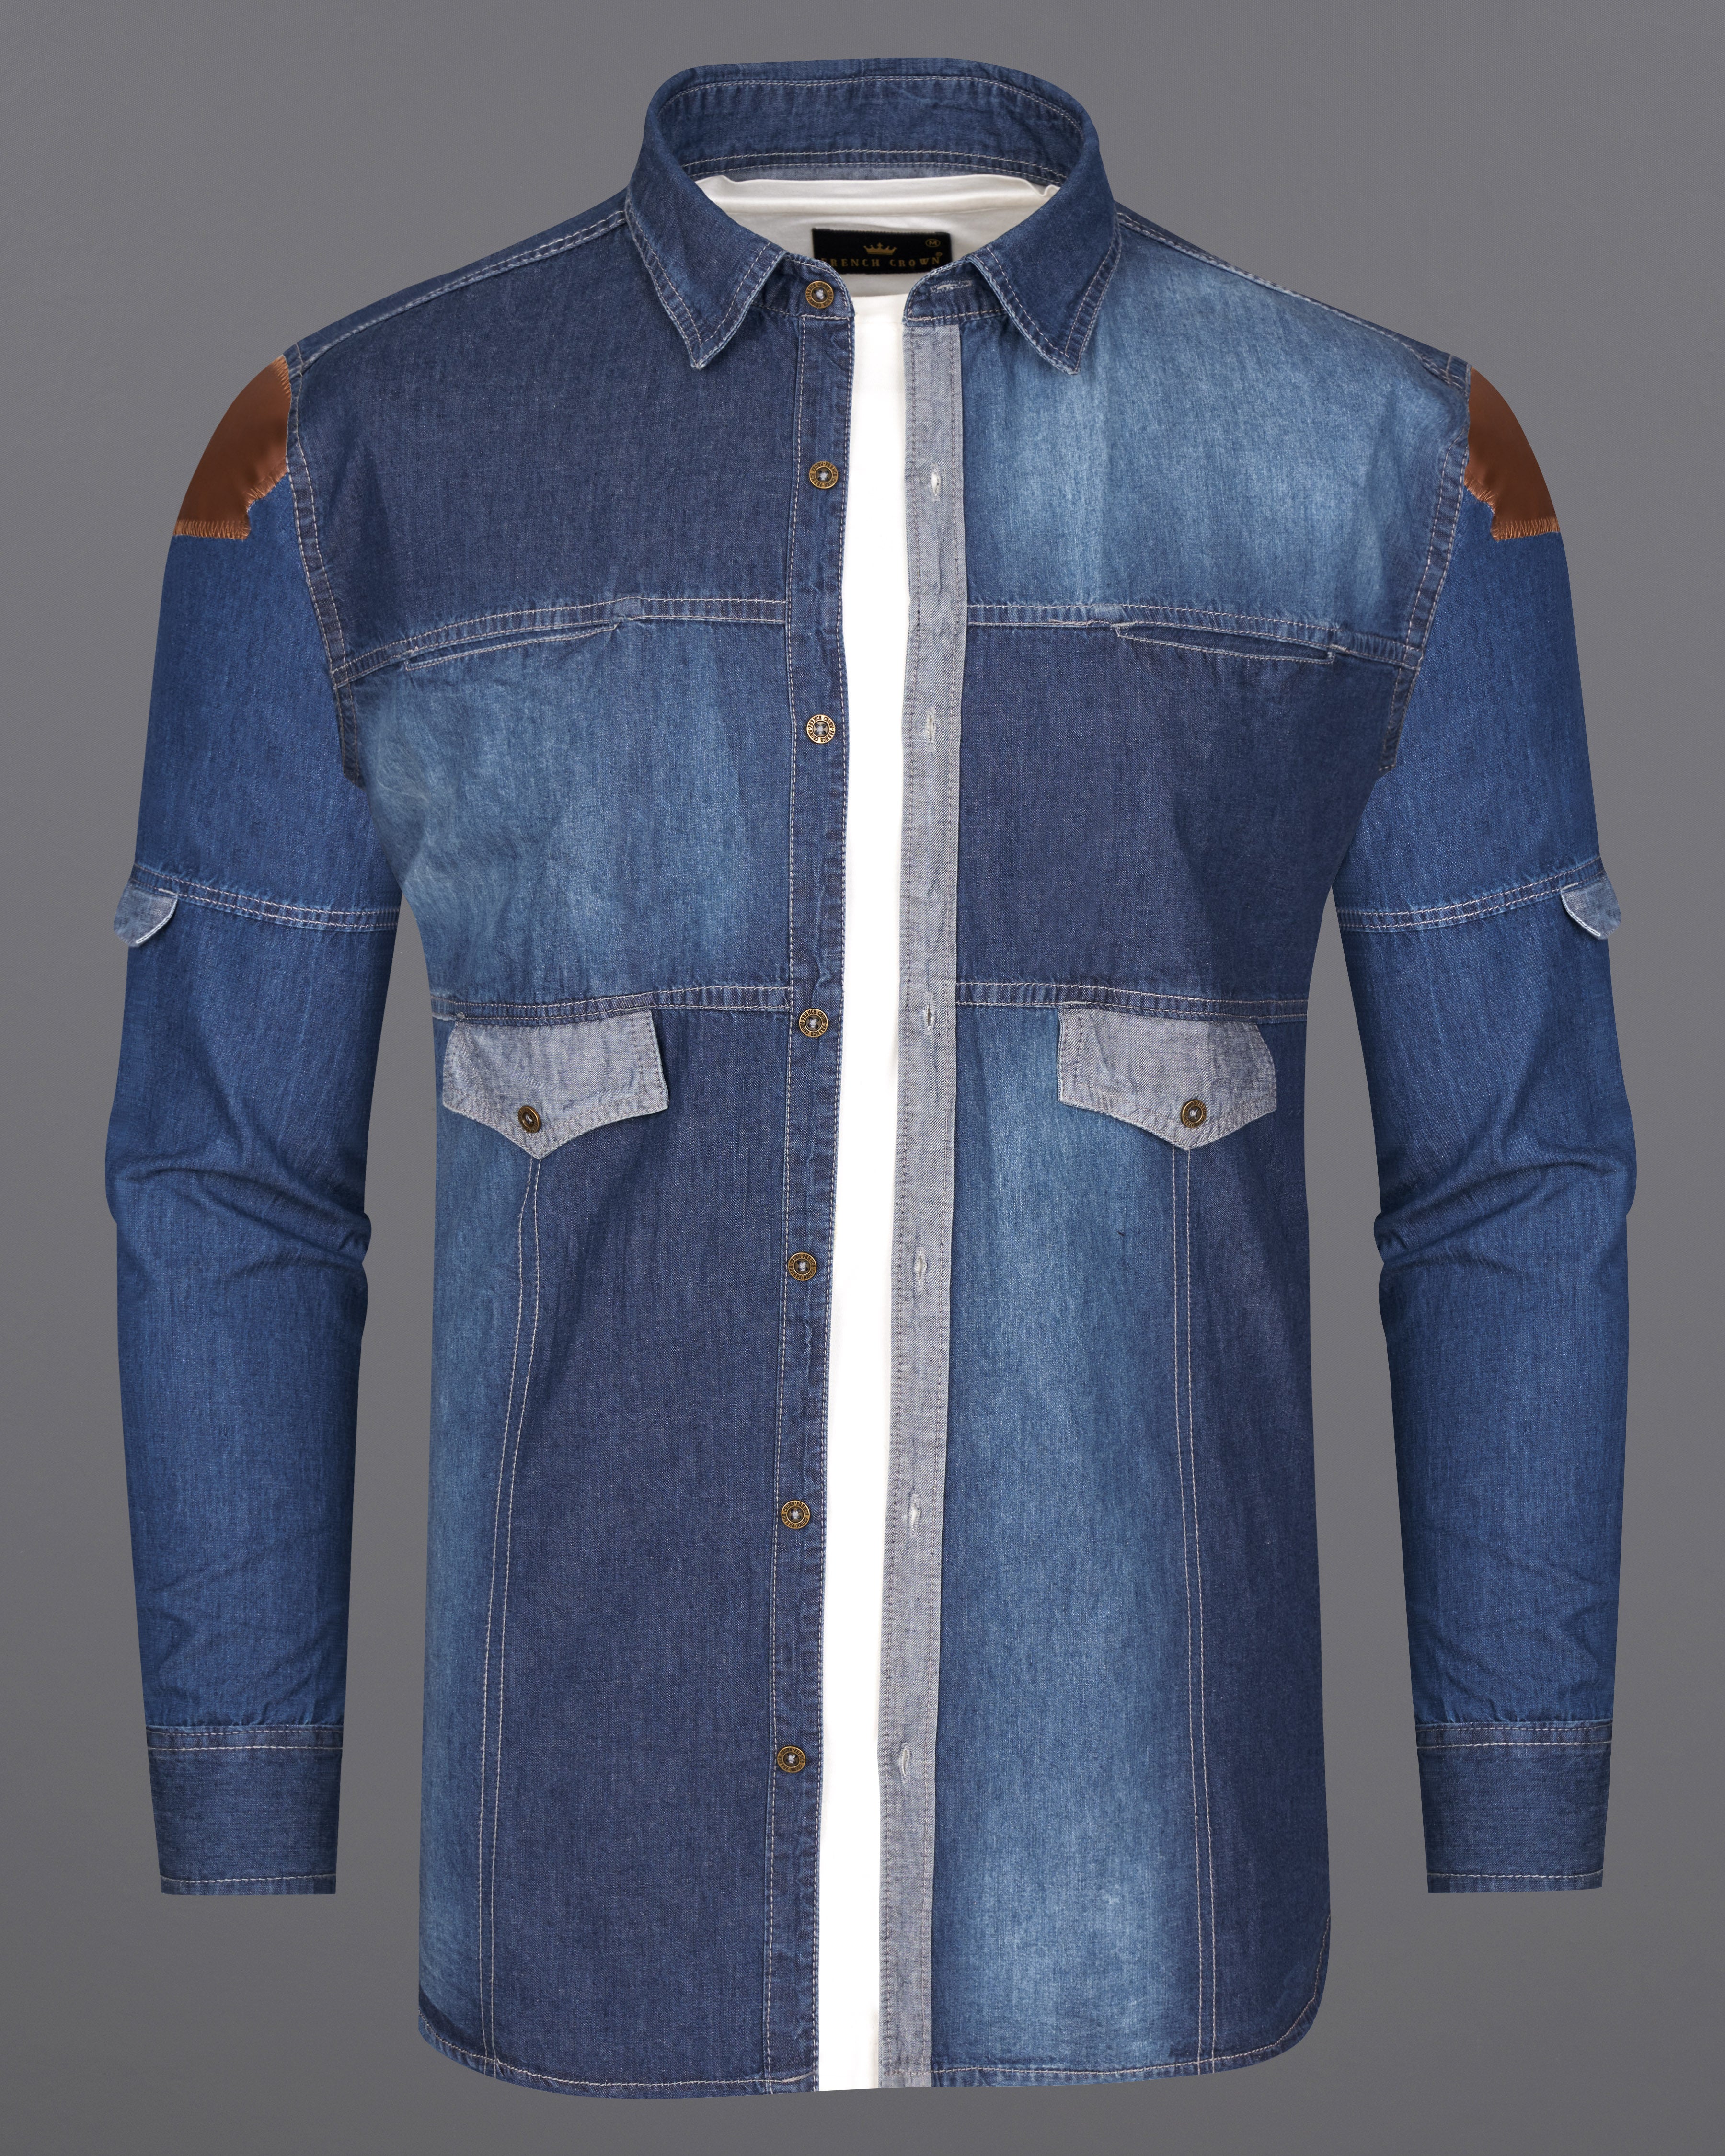 Muted Blue with Midnight Navy Blue Denim Designer Shirt With Leather Patch Work